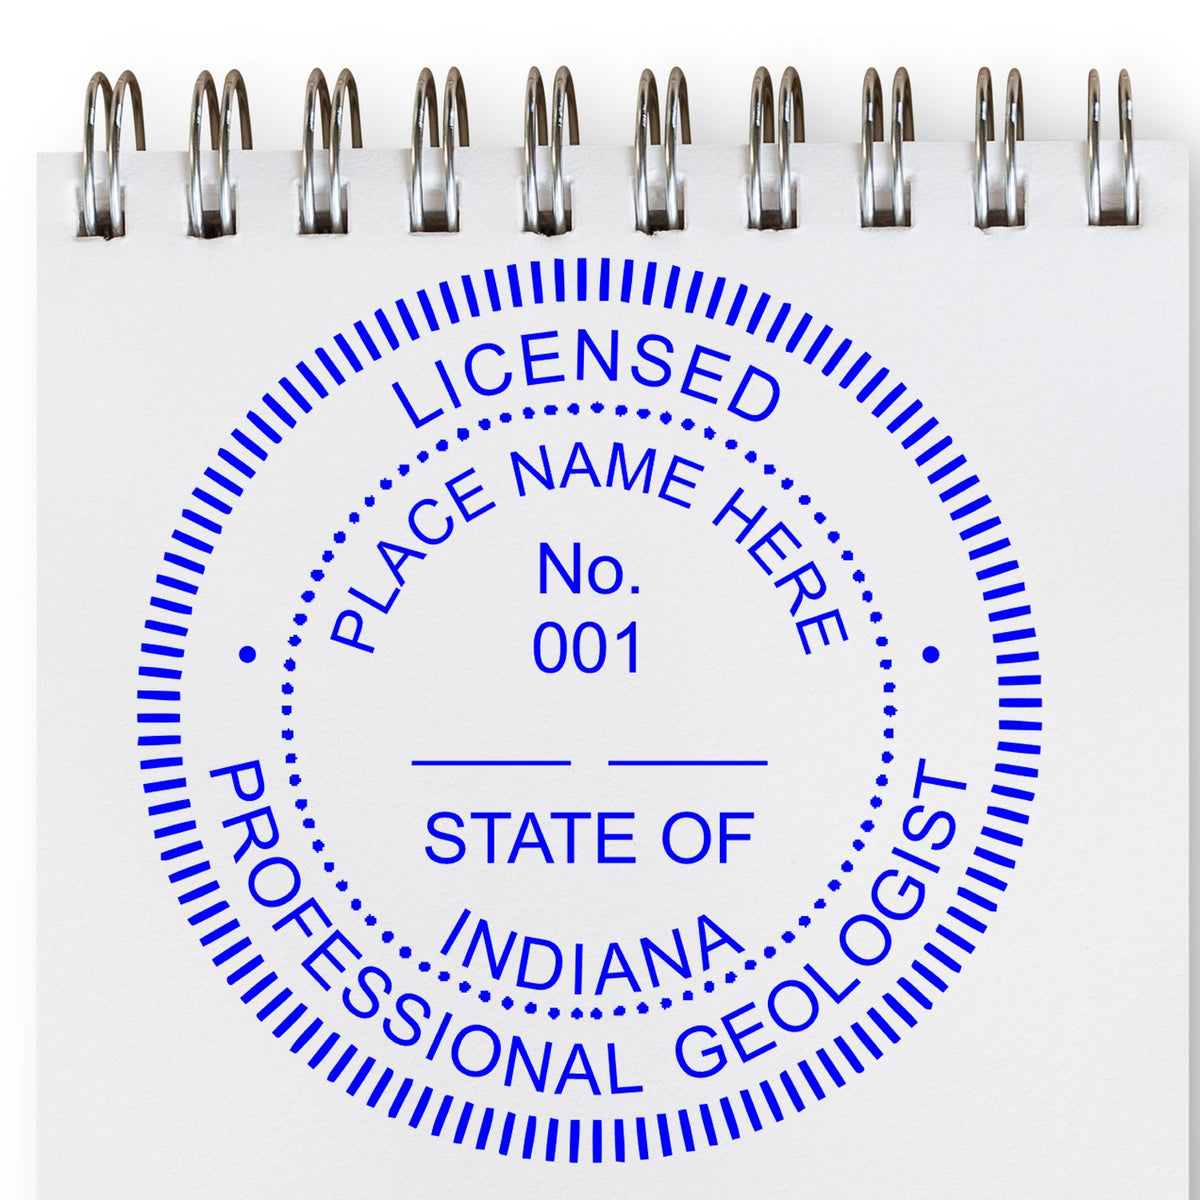 This paper is stamped with a sample imprint of the Self-Inking Indiana Geologist Stamp, signifying its quality and reliability.